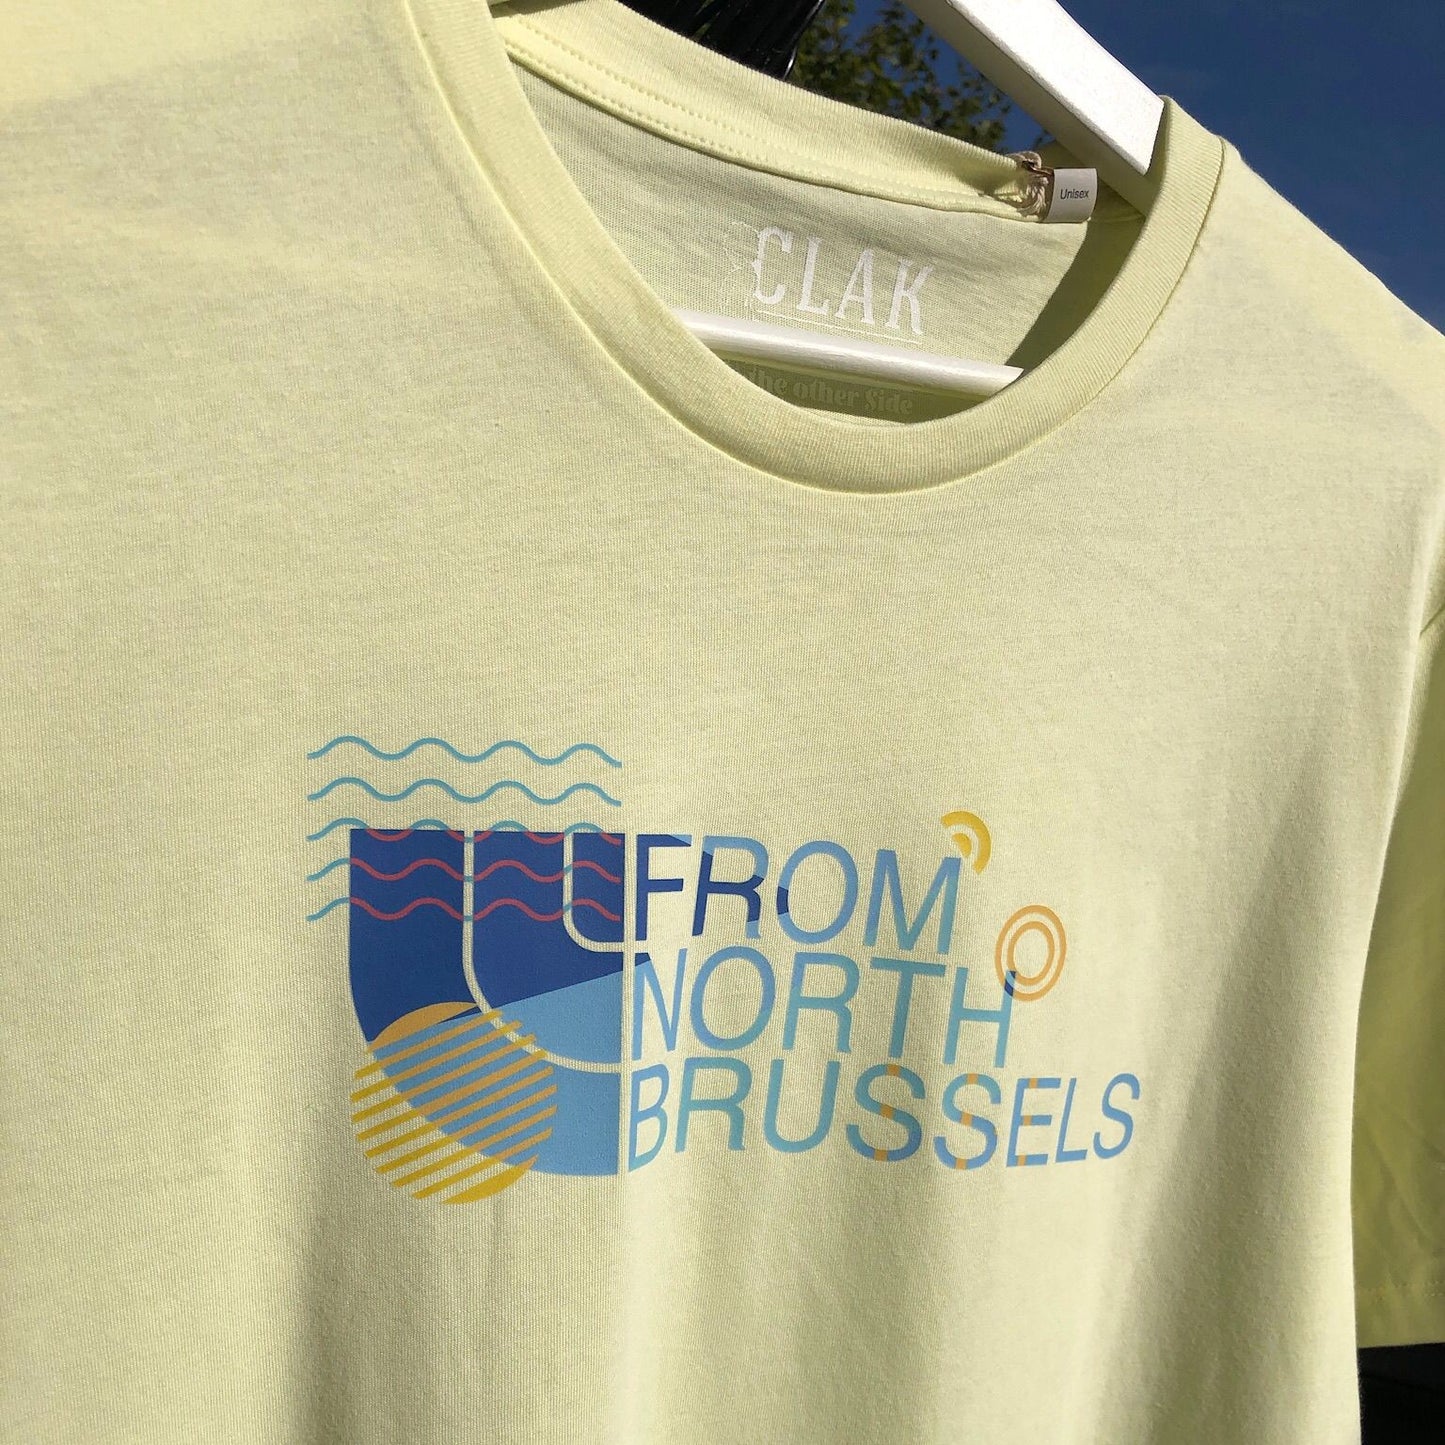 Men's t-shirt "From South Brussels"